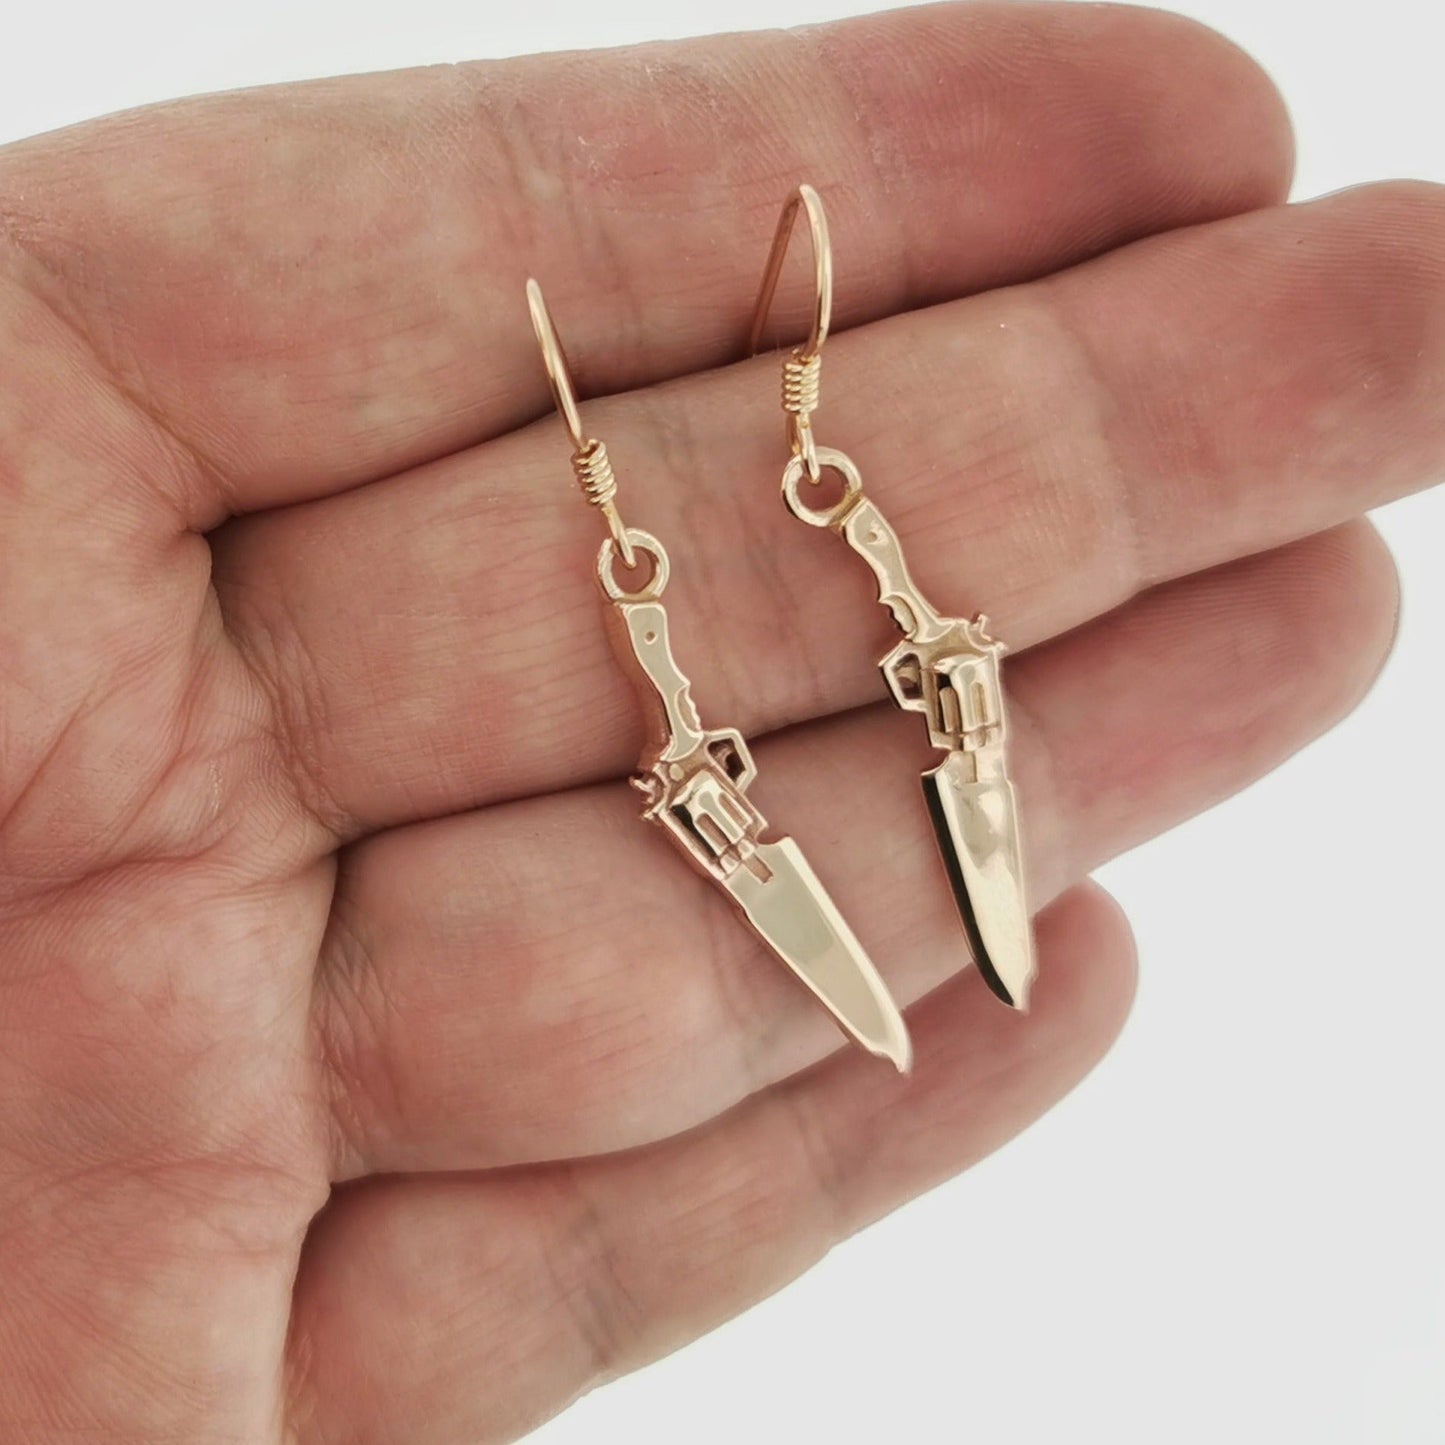 Final Fantasy 8 Gunblade Earrings Pair in Gold Made to Order